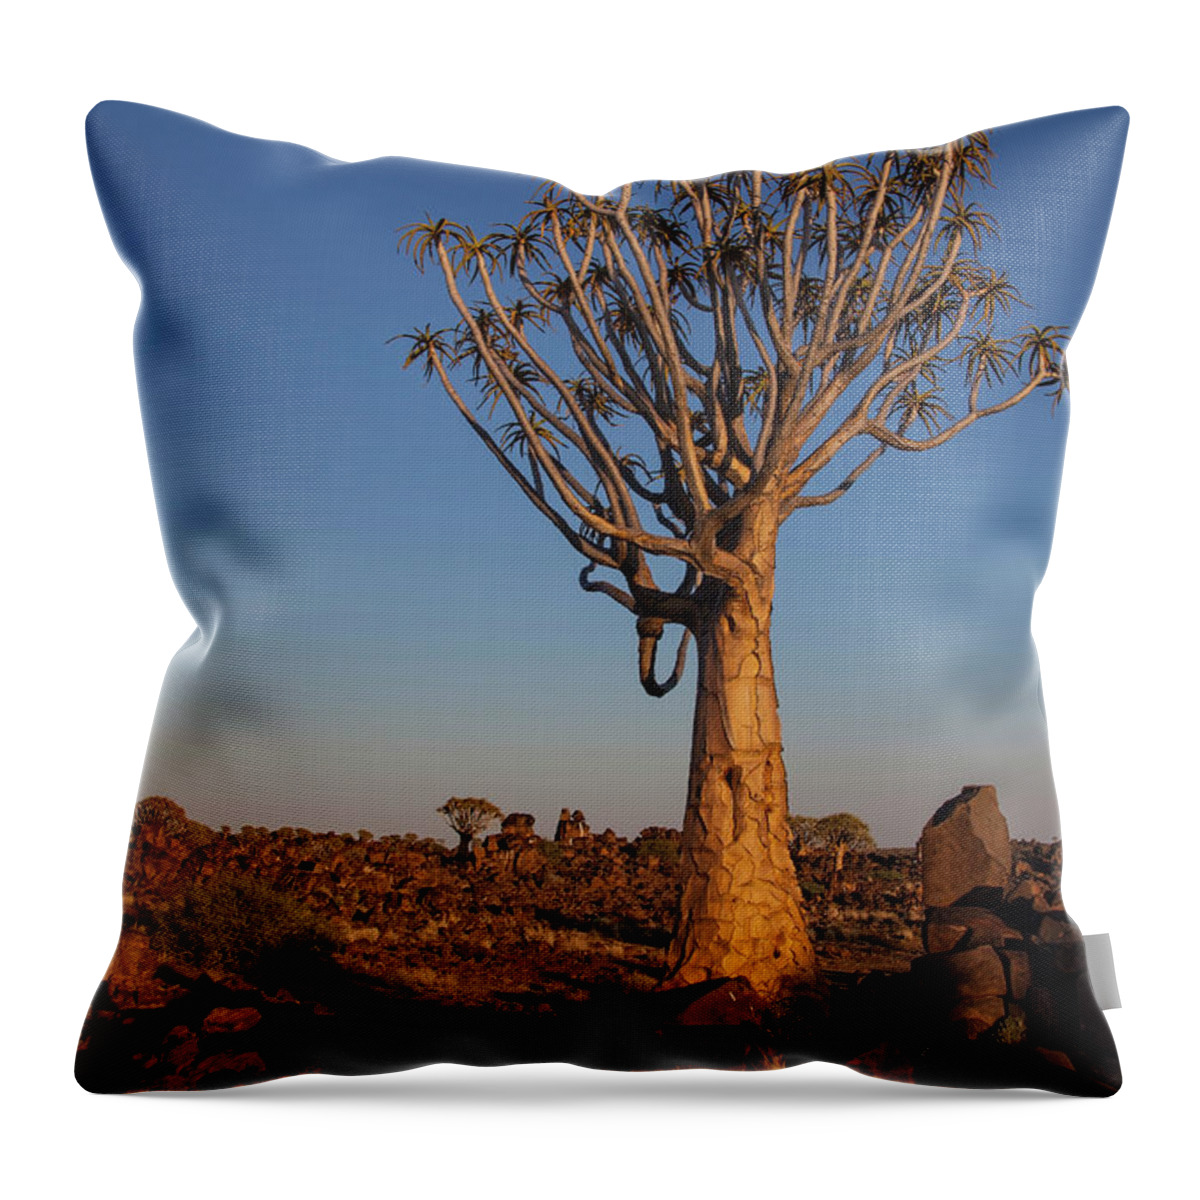 Dawn Throw Pillow featuring the photograph Quiver Tree With Glowing Sunlight by Lars Froelich / Design Pics